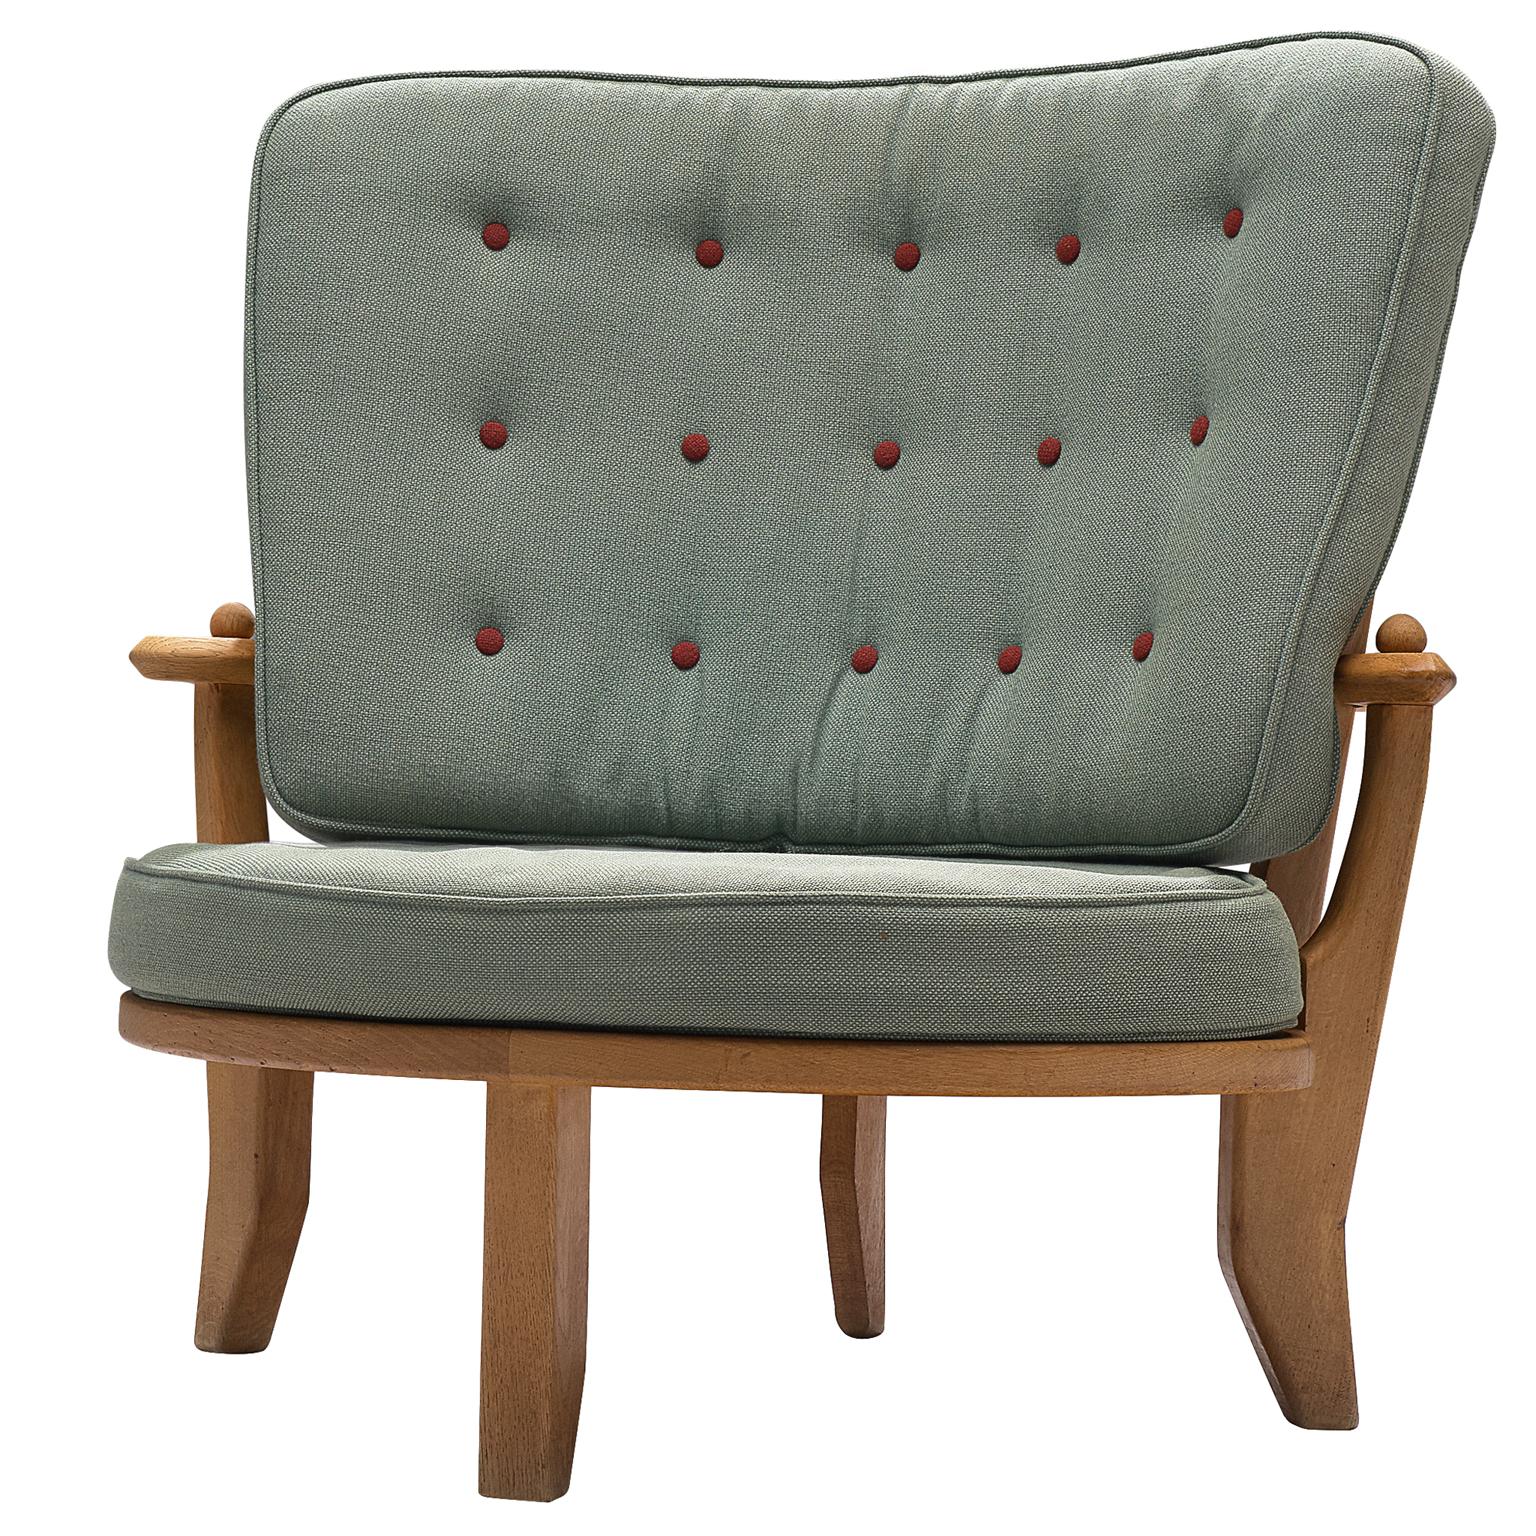 Guillerme & Chambron Lounge Chair in Green Fabric